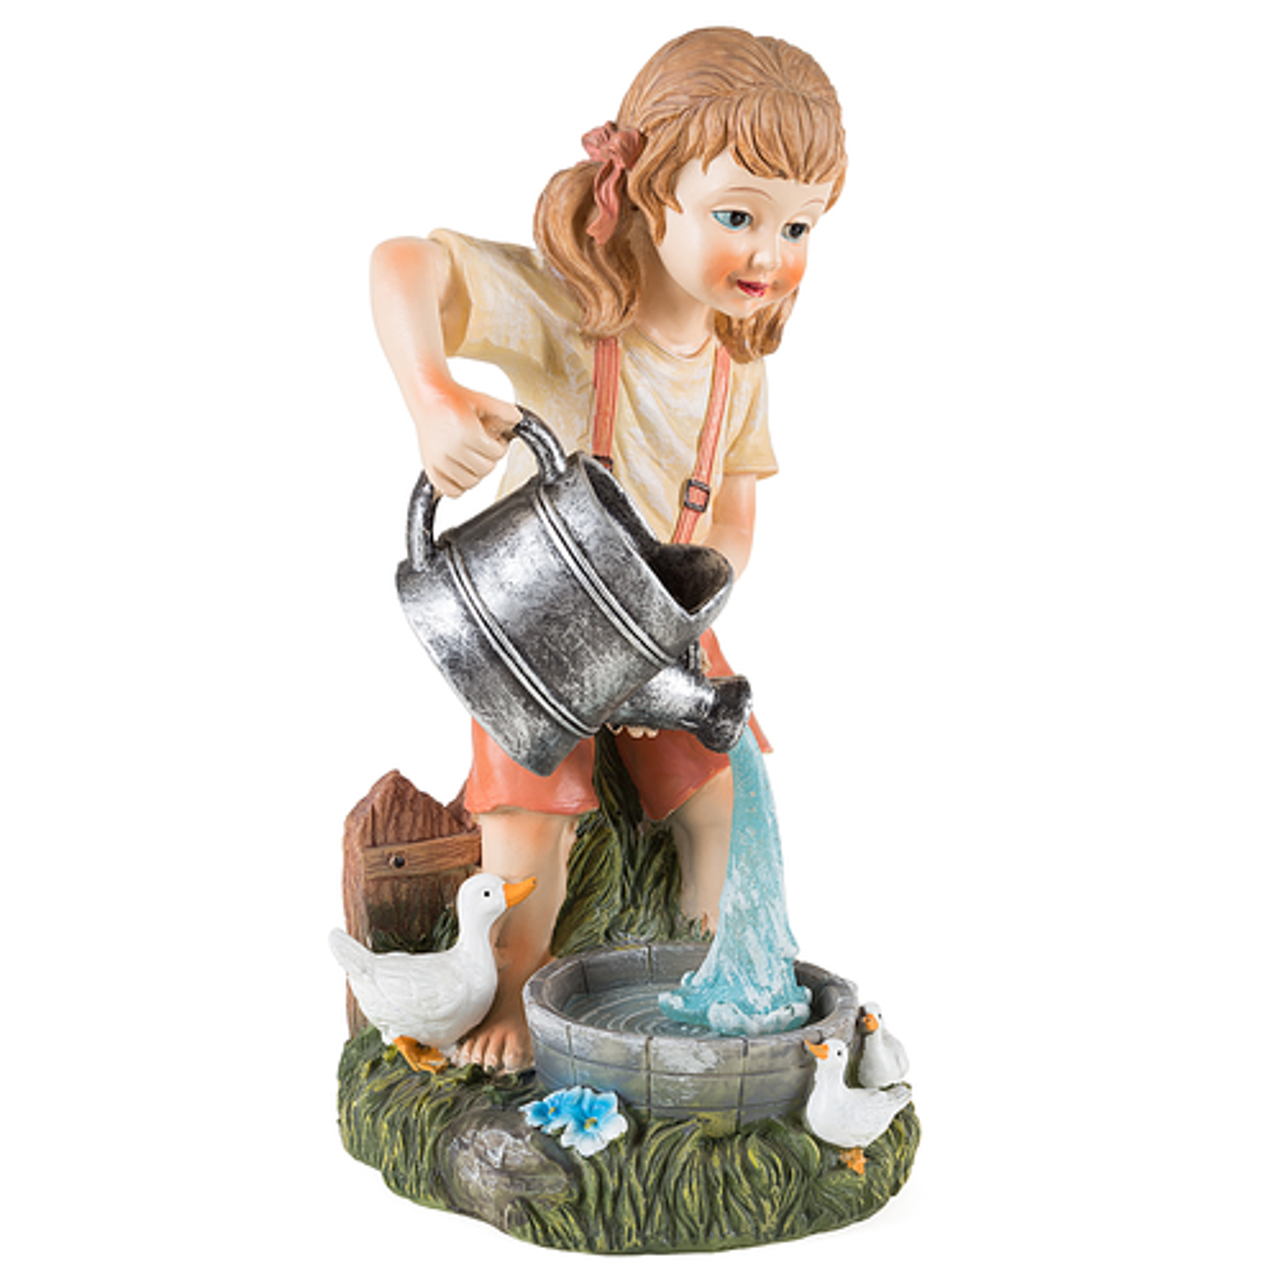 Nature Spring - Yard Décor, Solar Outdoor LED Light and Statue for Garden, Patio, Lawn, and Yard – Little Girl Statue - Peach